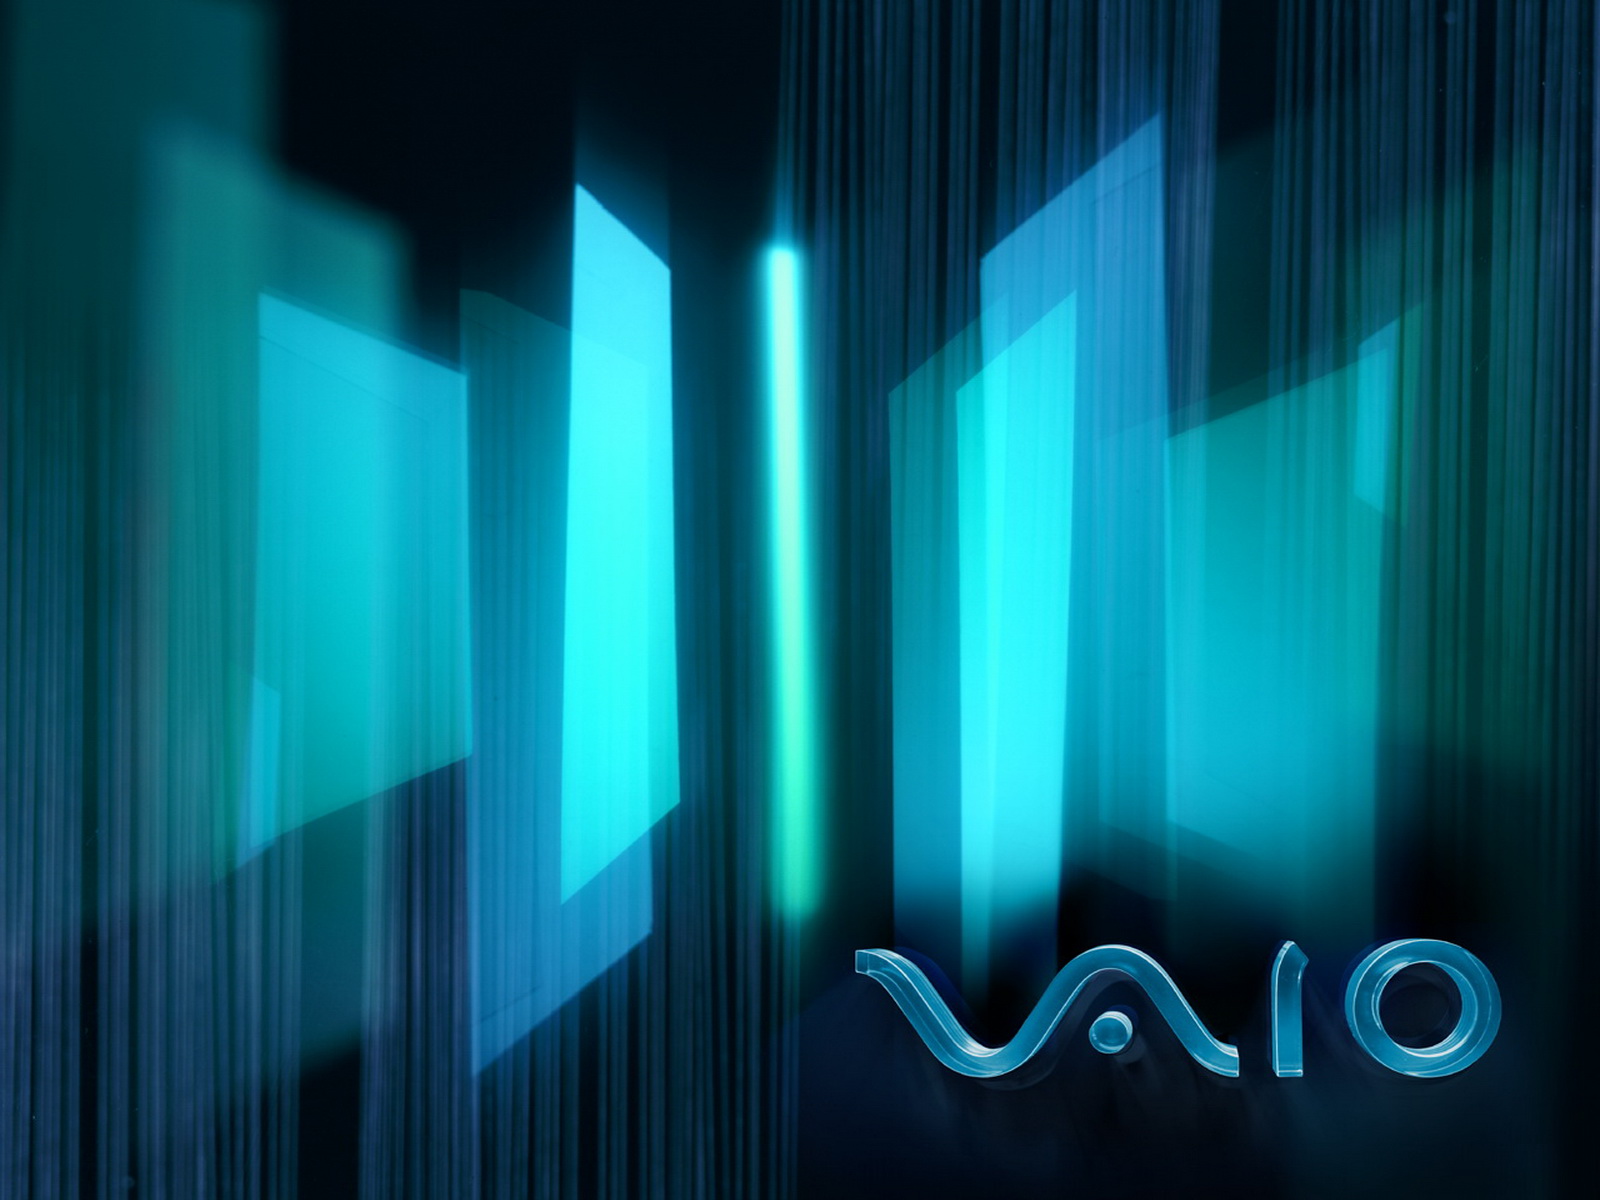 HD Sony Vaio Wallpaper Background For